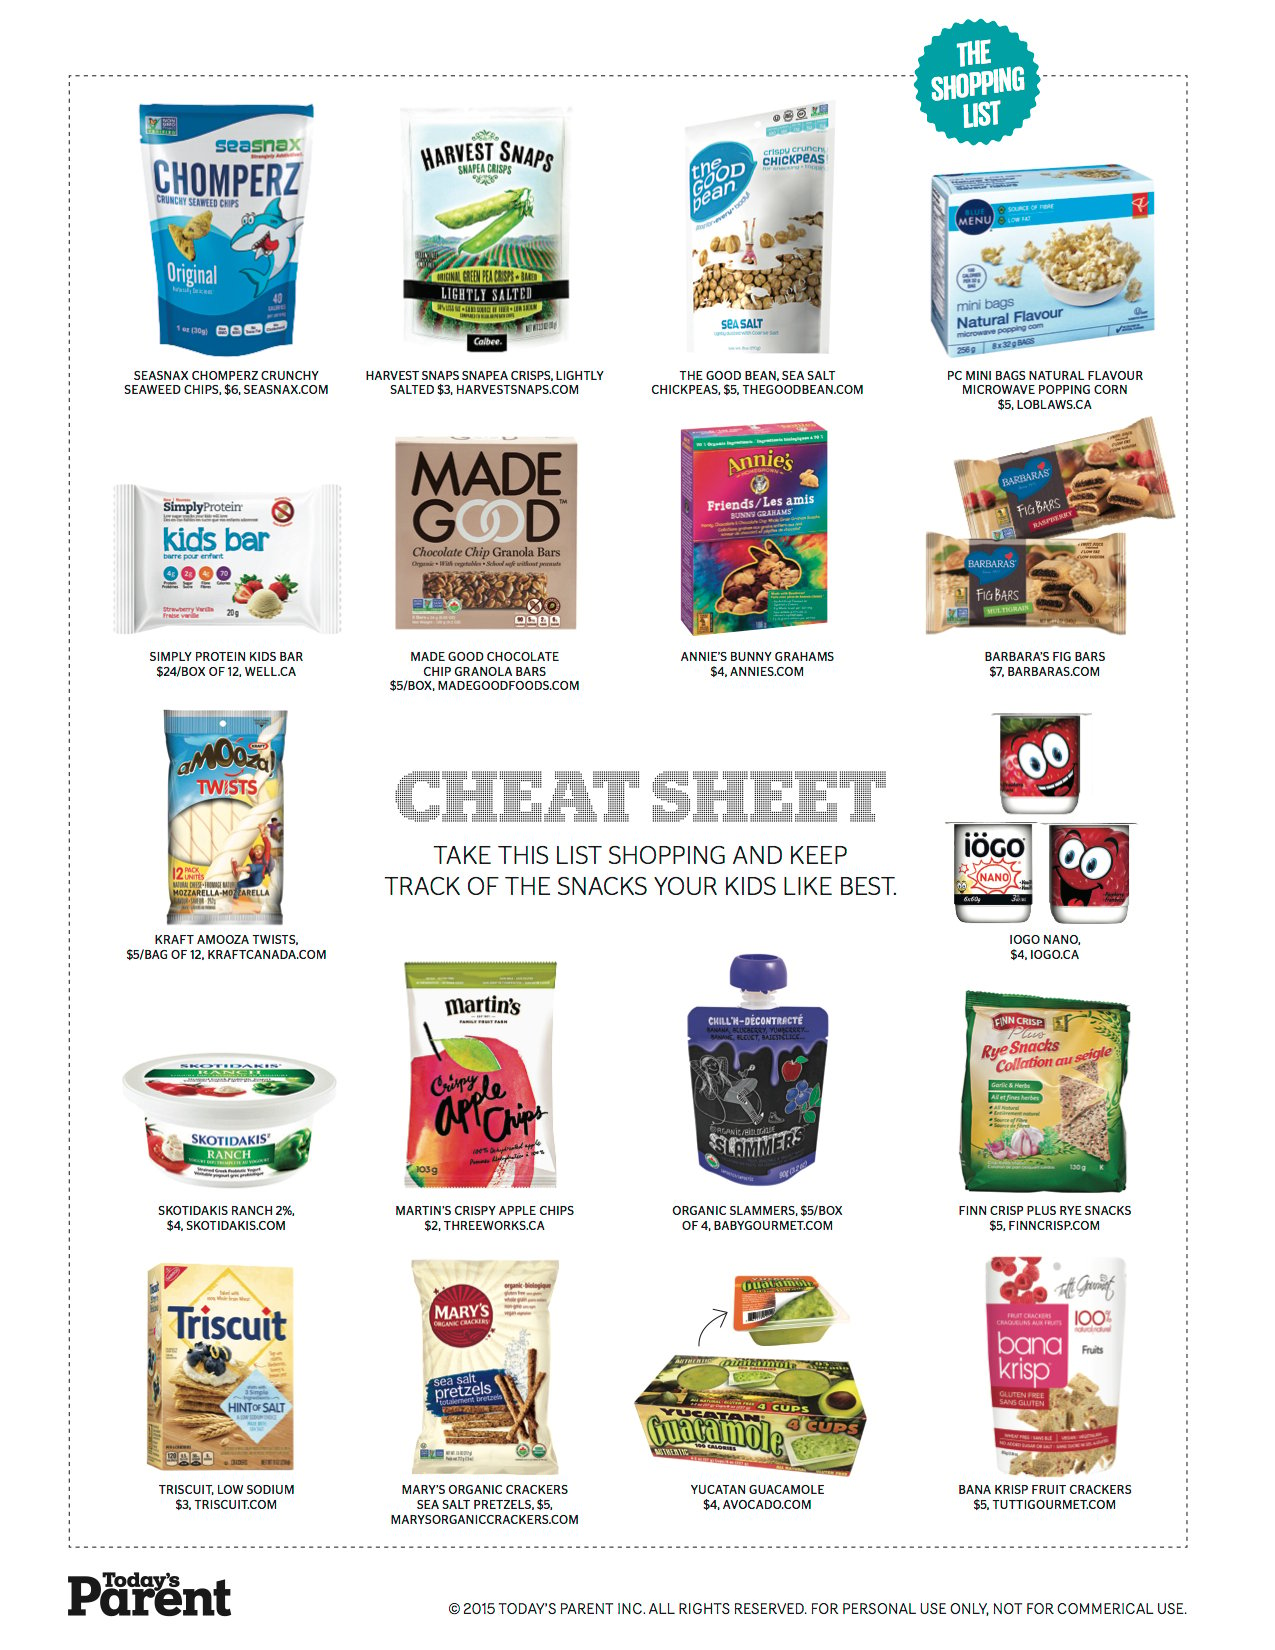 Today's Parent Snack Cheat Sheet